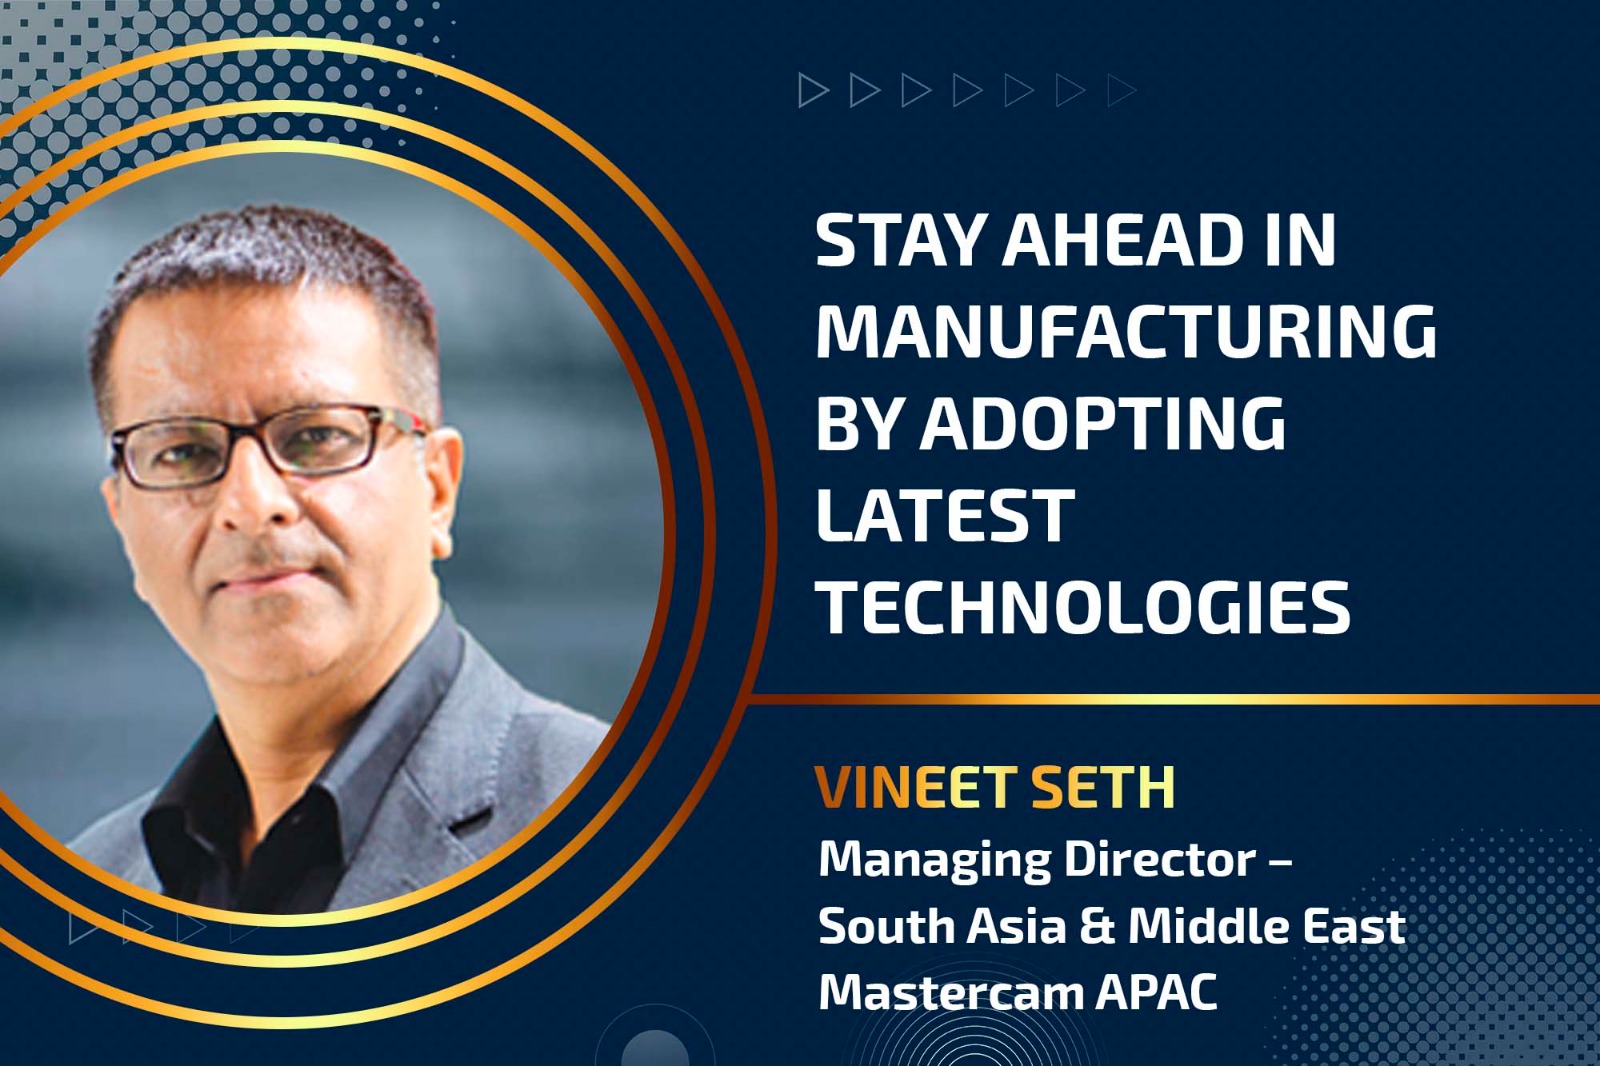 Stay ahead in manufacturing by adopting latest technologies